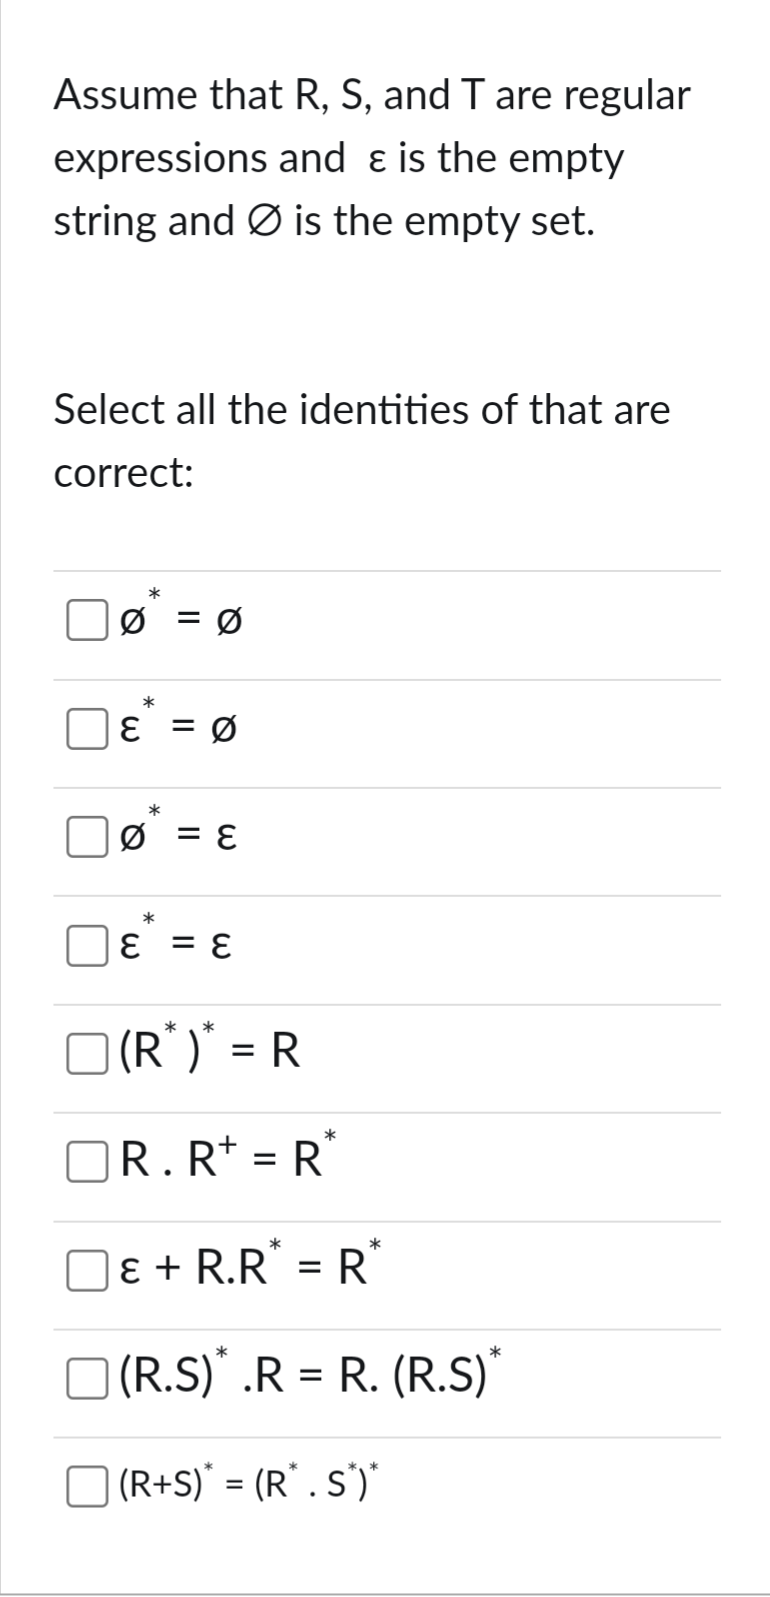 Assume that R, S, and T are regular
expressions and ε is the empty
string and is the empty set.
Select all the identities of that are
correct:
ω
Q
0 = 0
ε
*
=
Q
*
= ε
*
= ε
*
(R*)* = R
*
☐ R. R+ = R*
ε + R.R* = R*
| (R.S)* .R = R. (R.S)*
(R+S)* = (R". S*')"